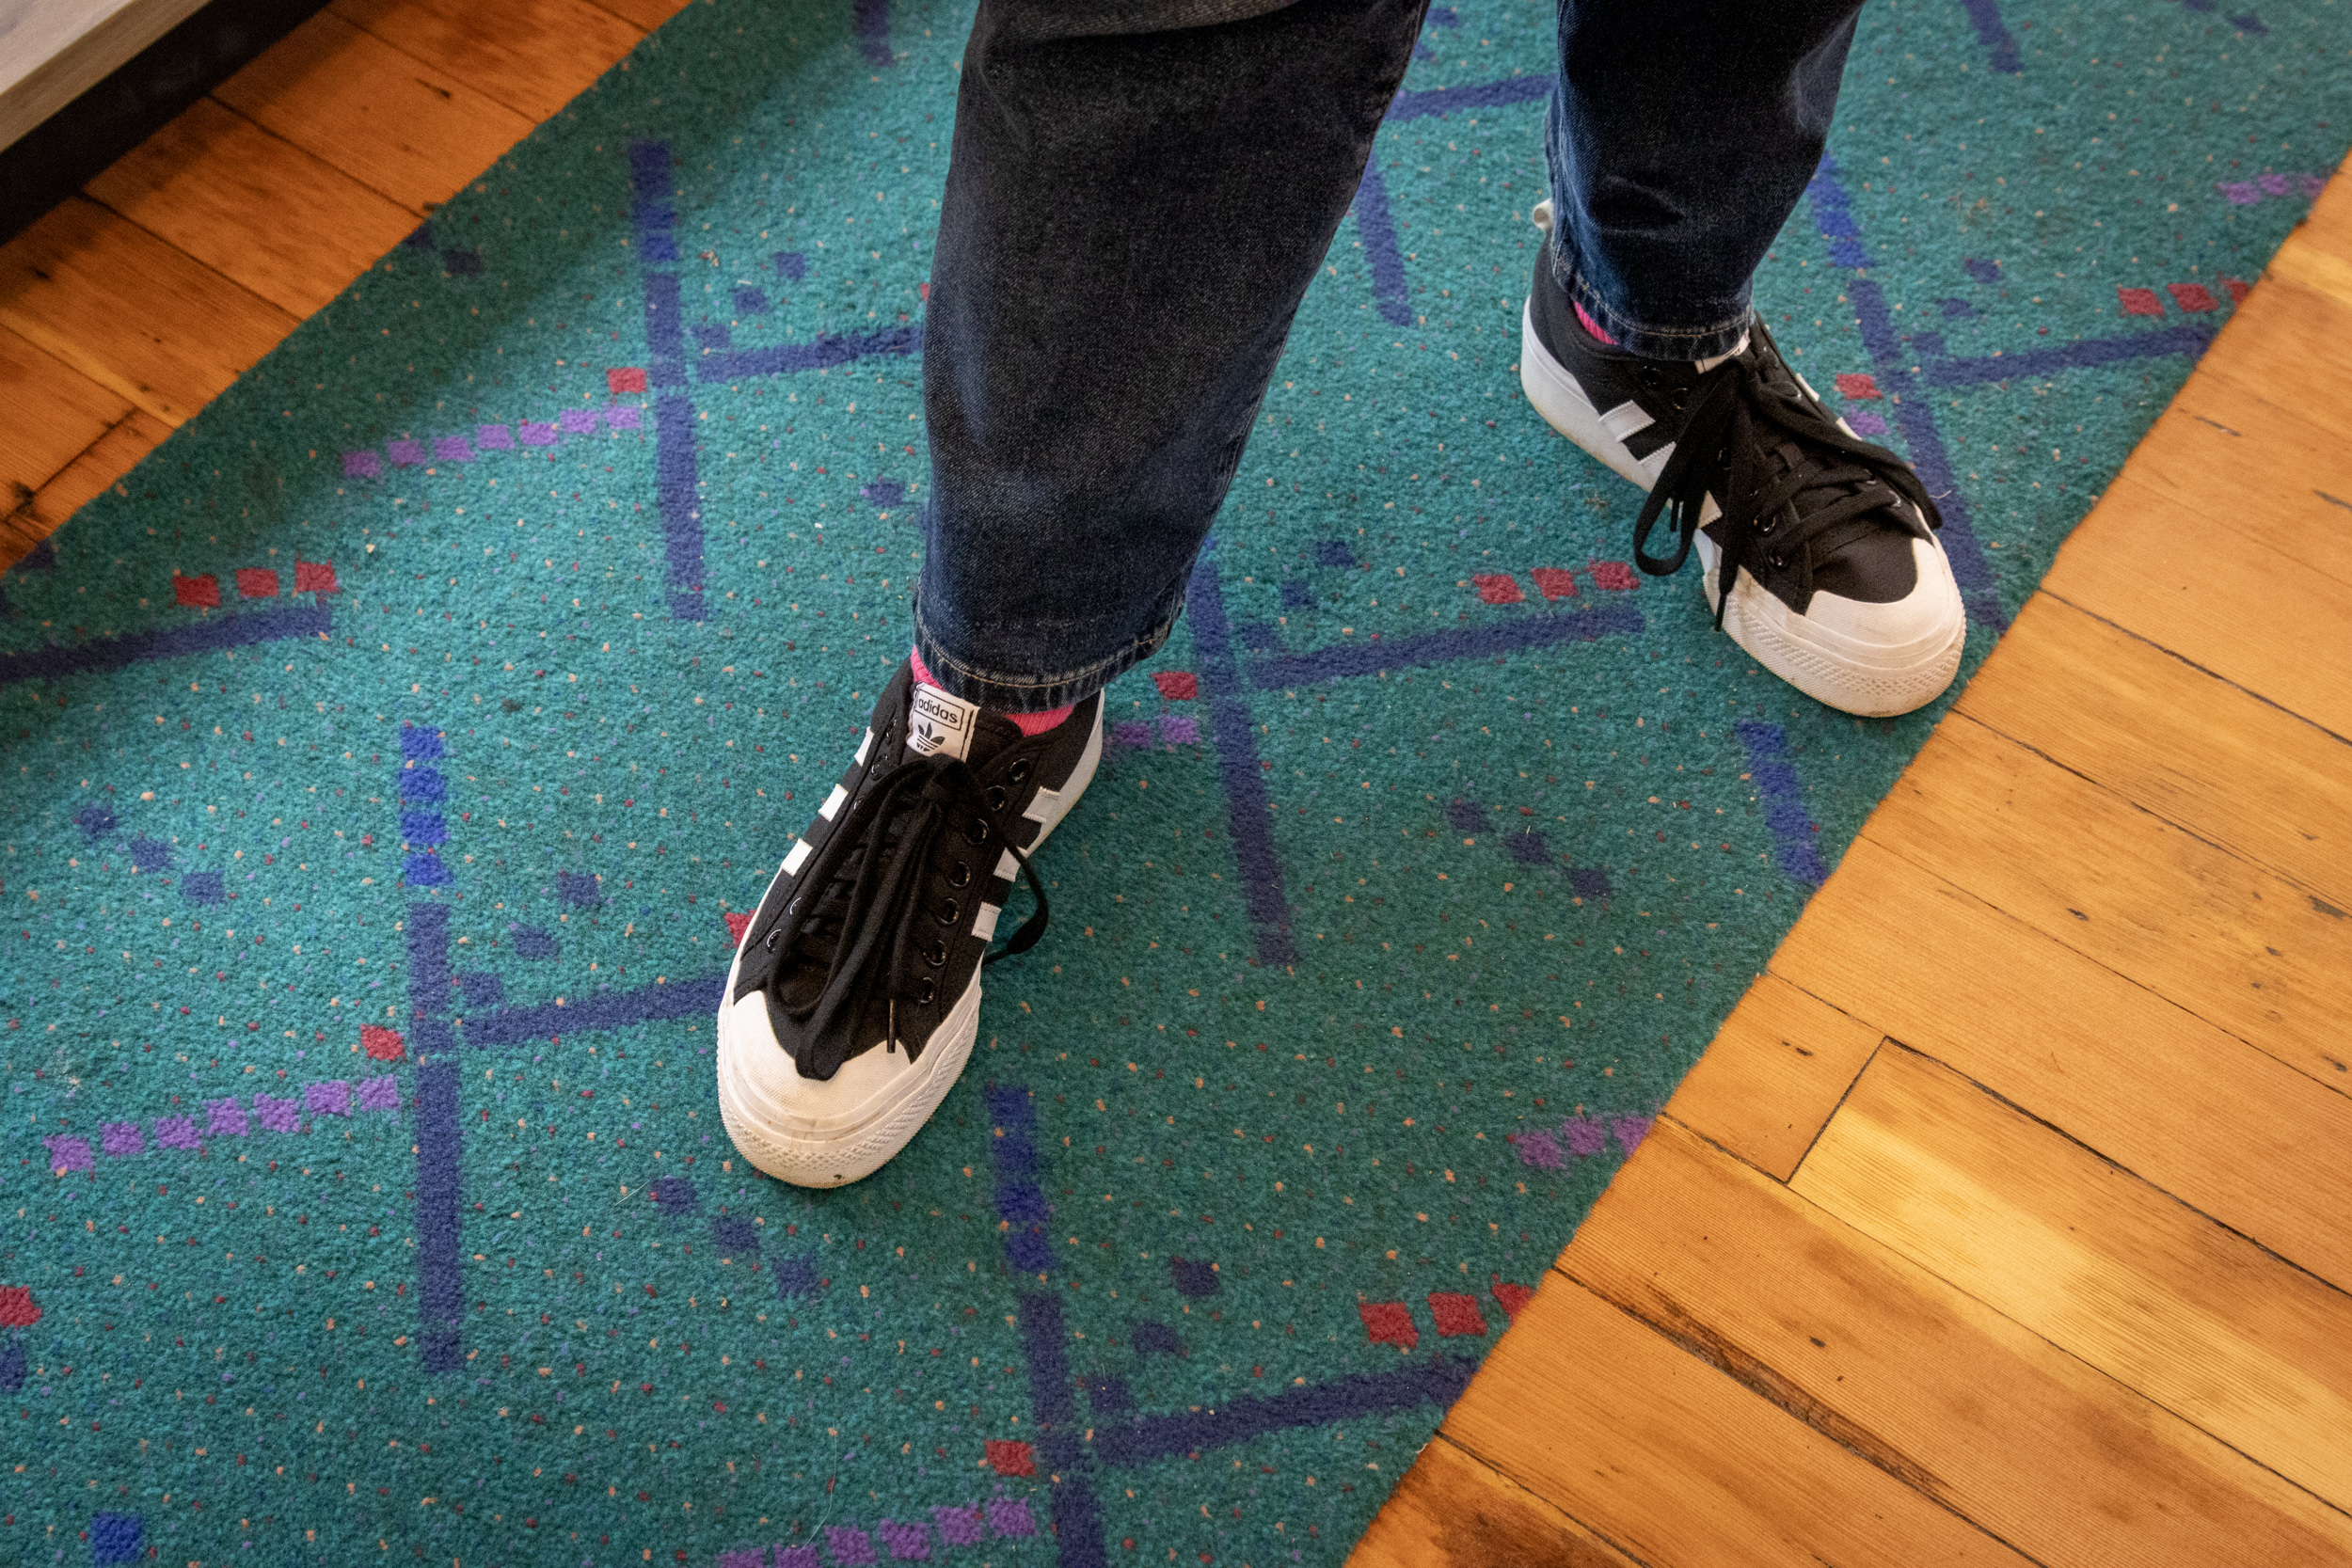 A person wearing black and white sneakers standing on the old PDX (Portland International Airport) carpet.